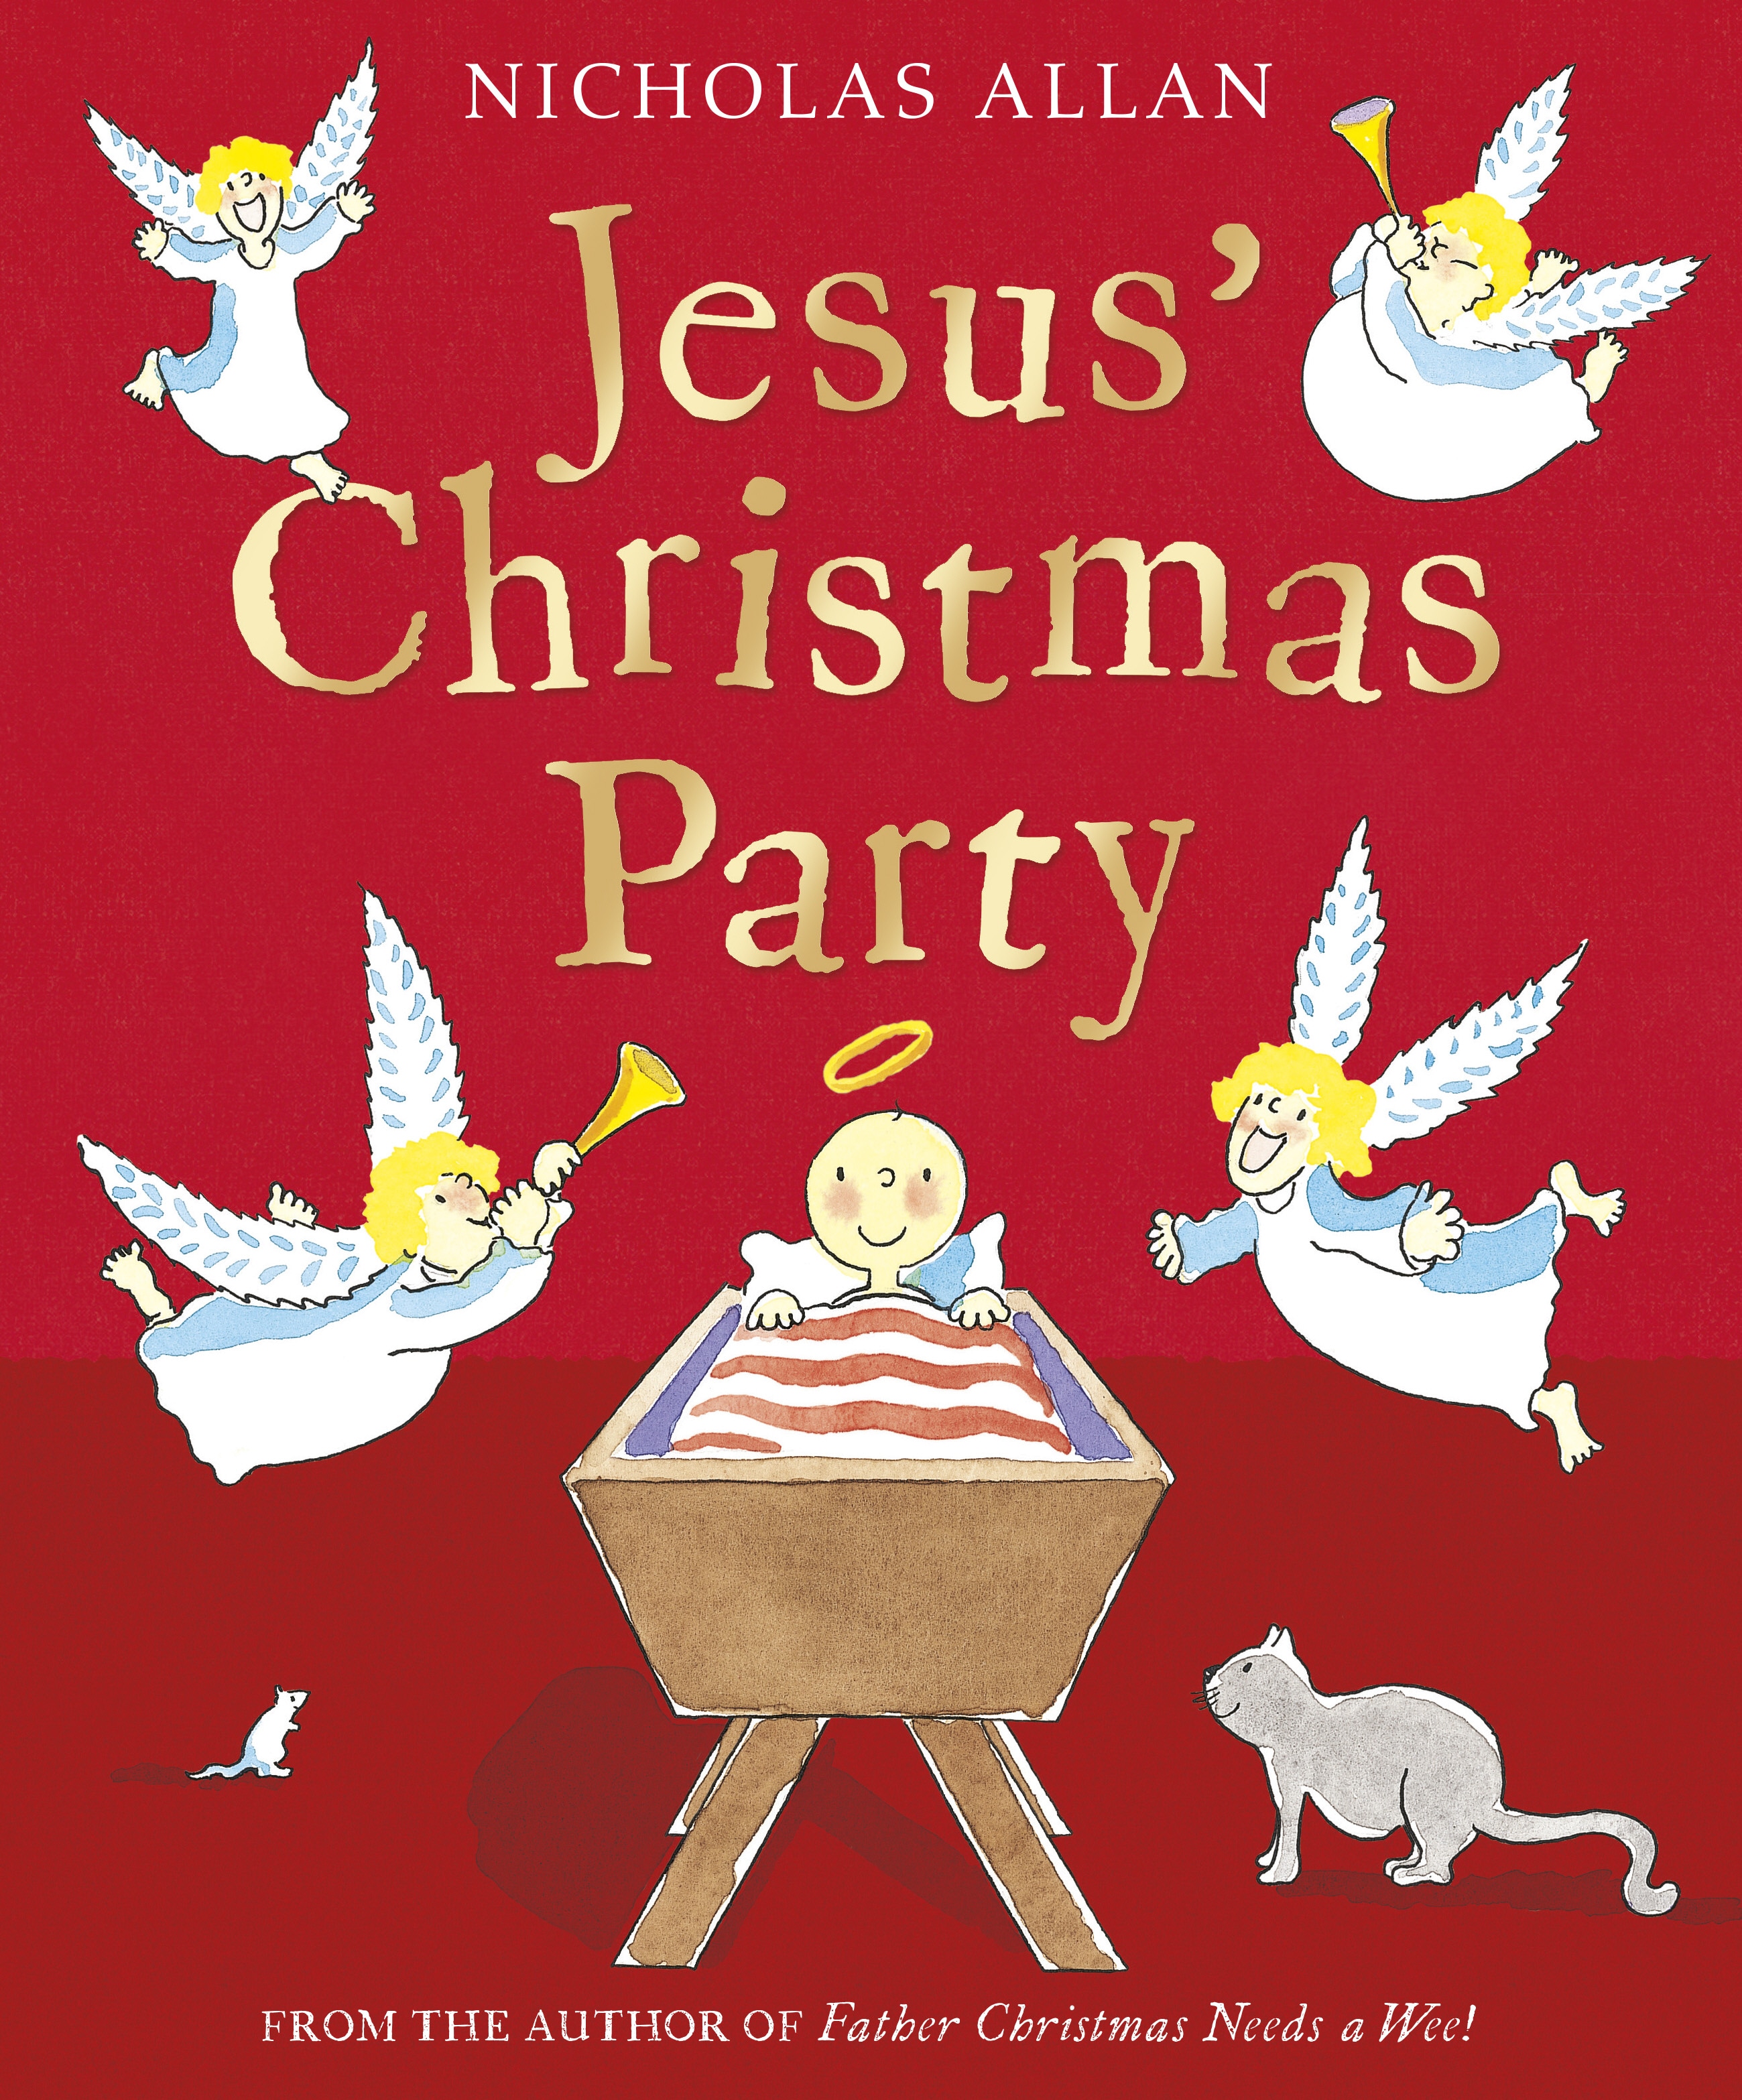 Book “Jesus' Christmas Party” by Nicholas Allan, Sue Buswell — October 6, 2011